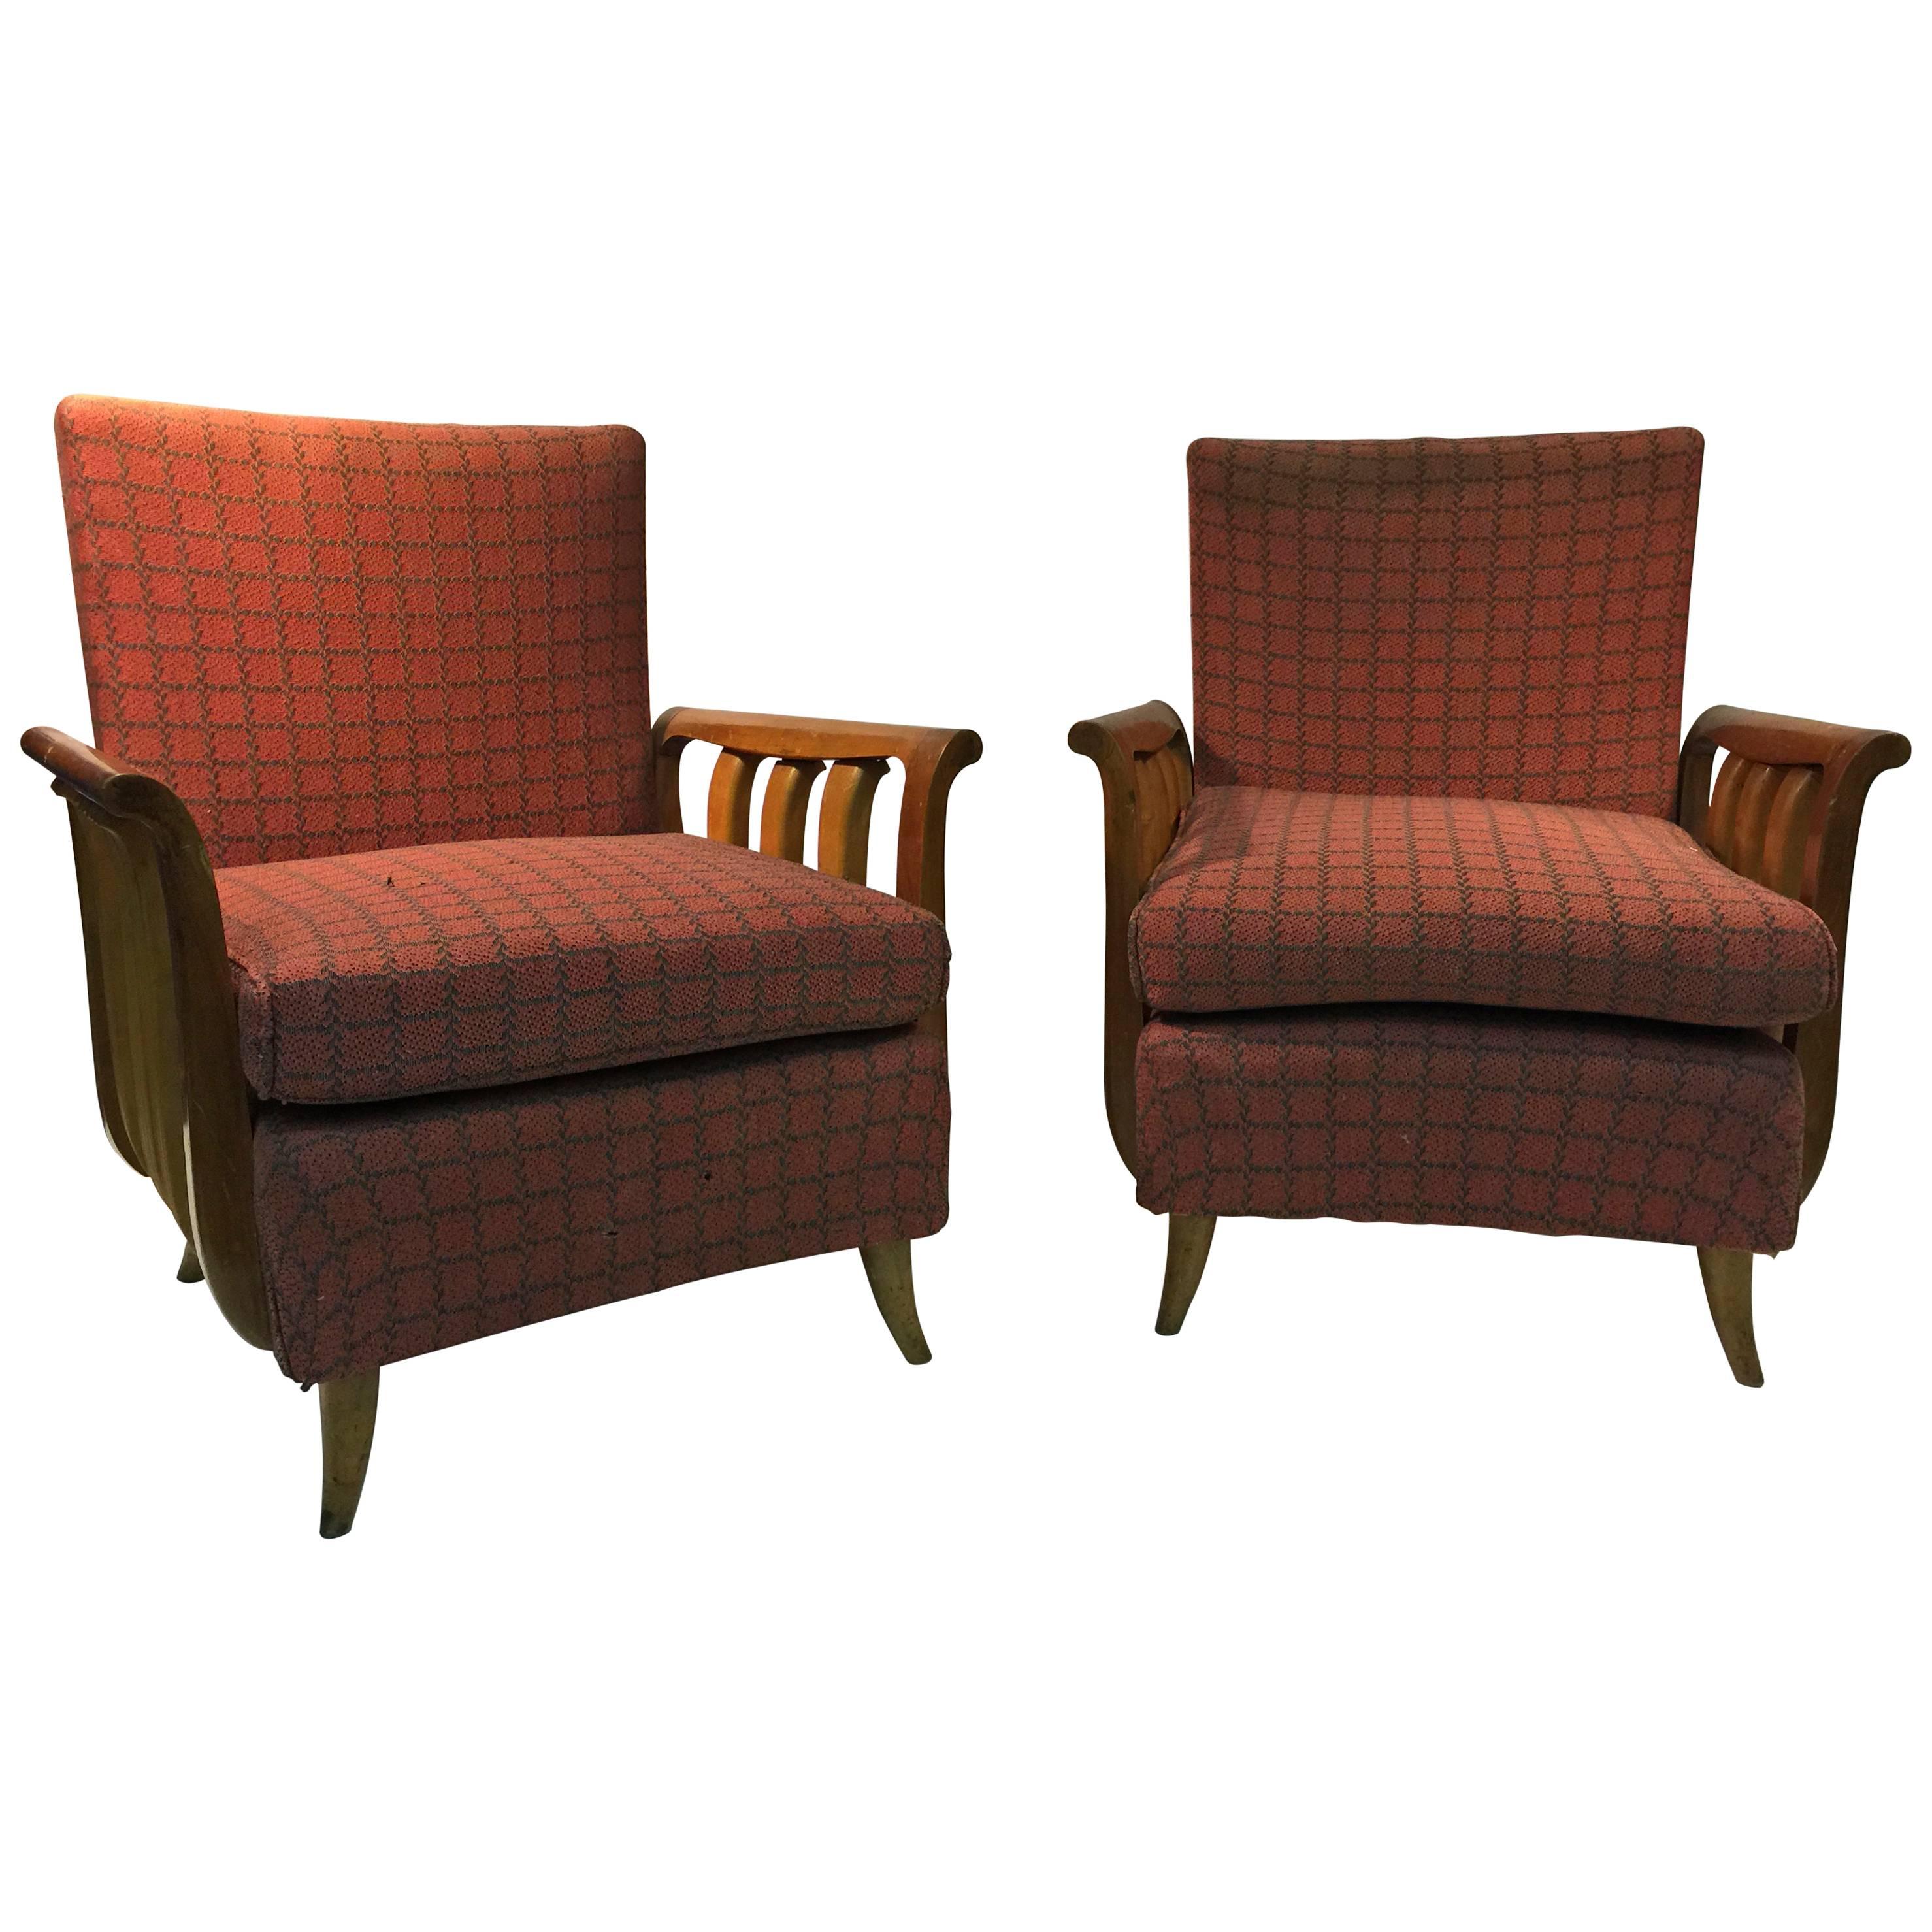 Phenomenal Pair of Italian Art Deco Chairs in the Manner of Paolo Buffa For Sale